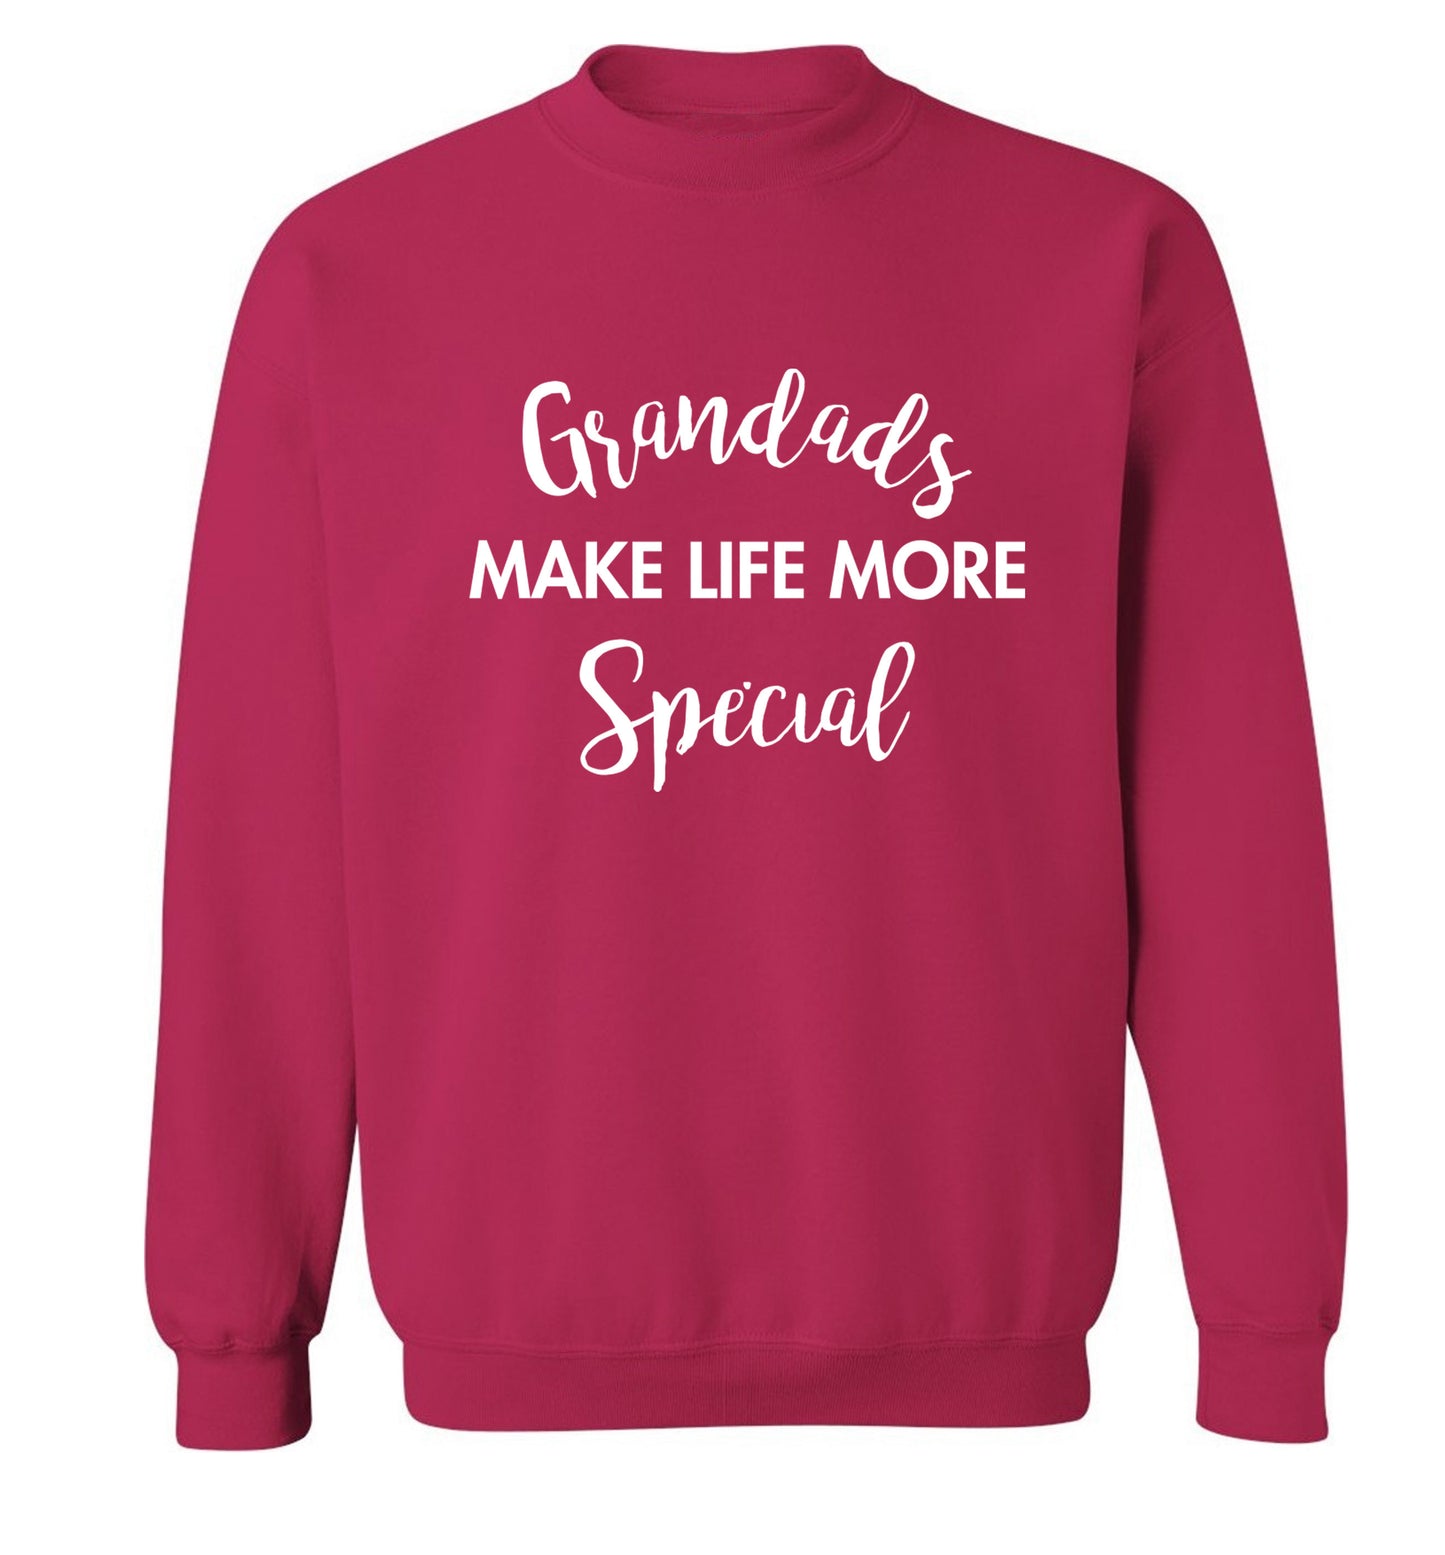 Grandads make life more special Adult's unisex pink Sweater 2XL